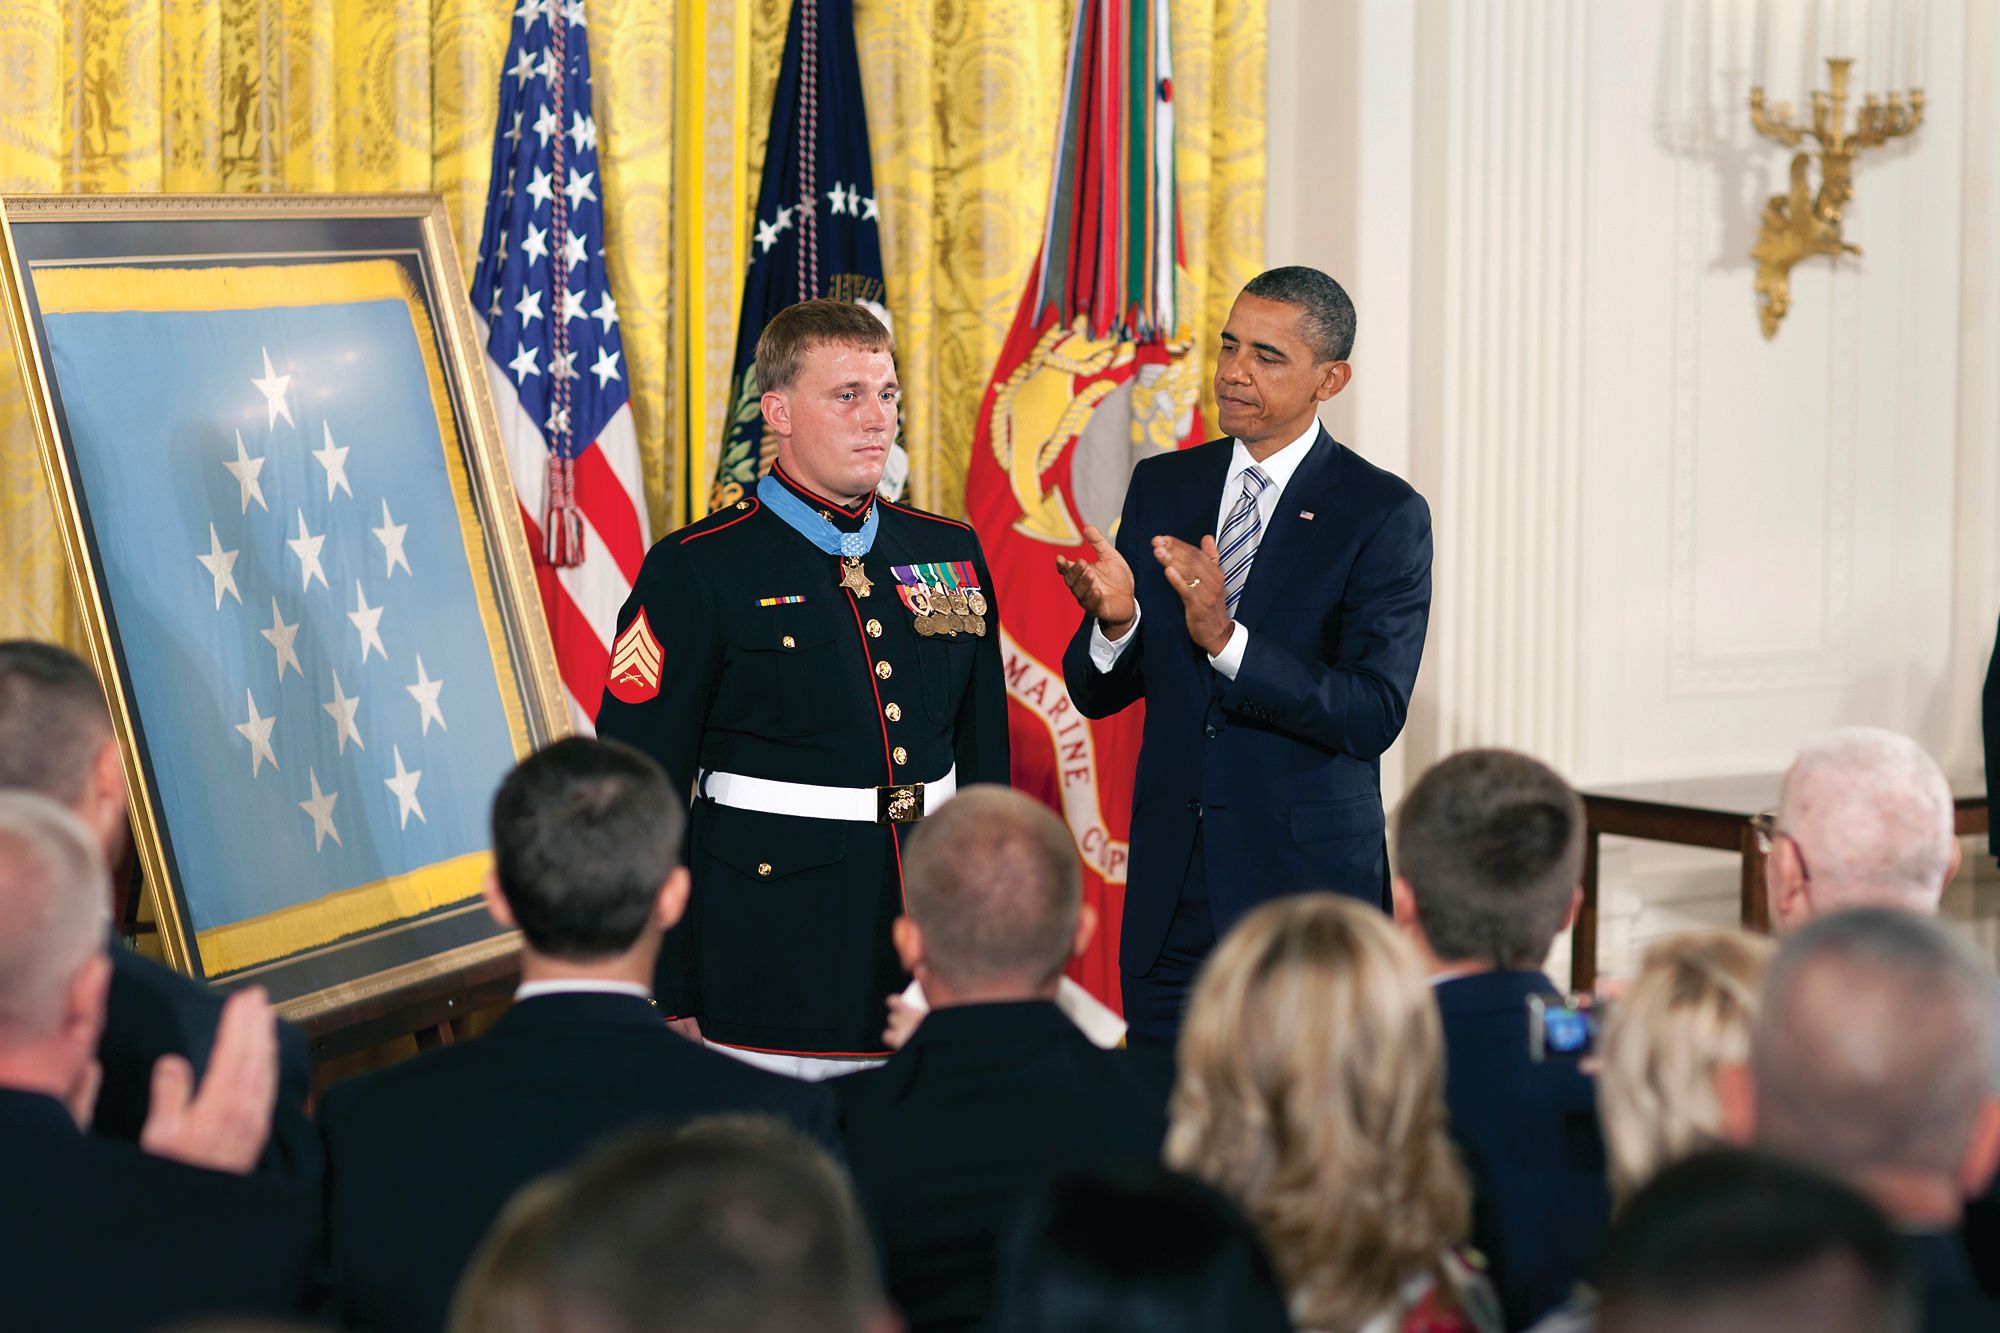 President Obama applauds Sergeant Dakota Meyer, the first living Marine recipient of the Medal of Honor for actions in Afghanistan.